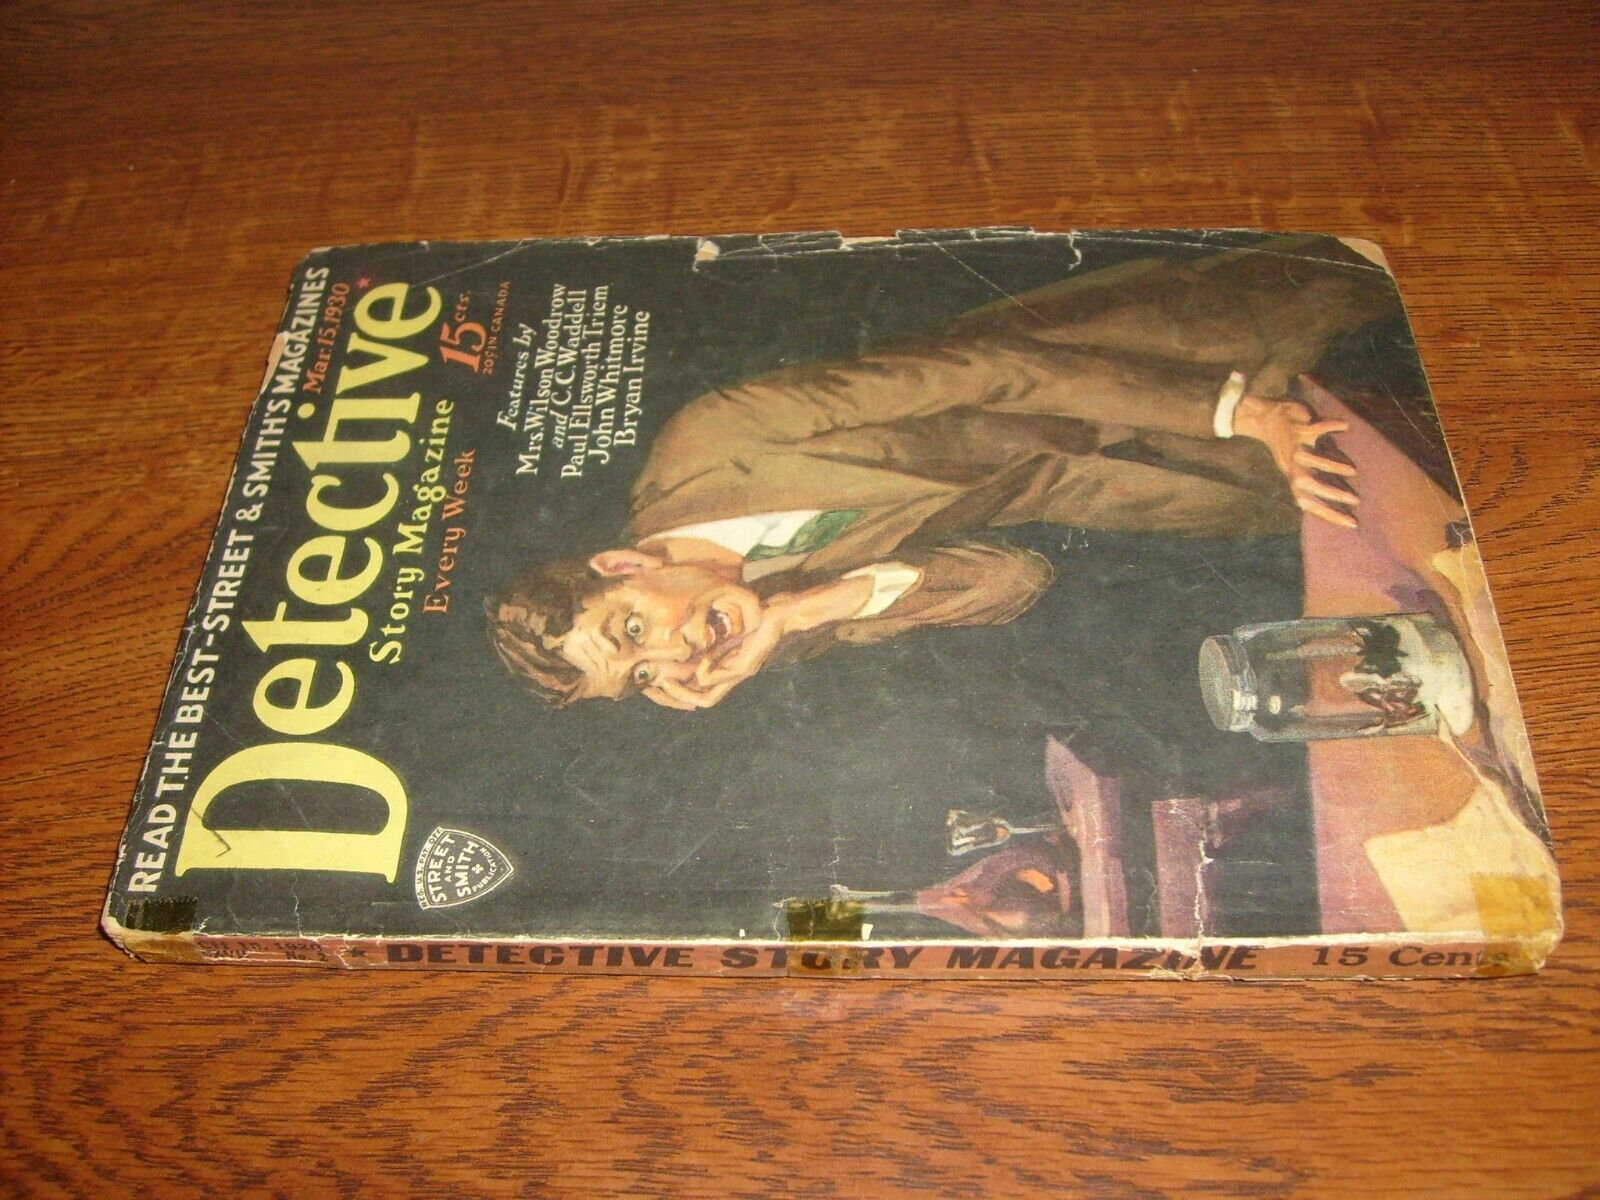 DETECTIVE STORY MAGAZINE PULP,  MARCH 15 1930, GOOD